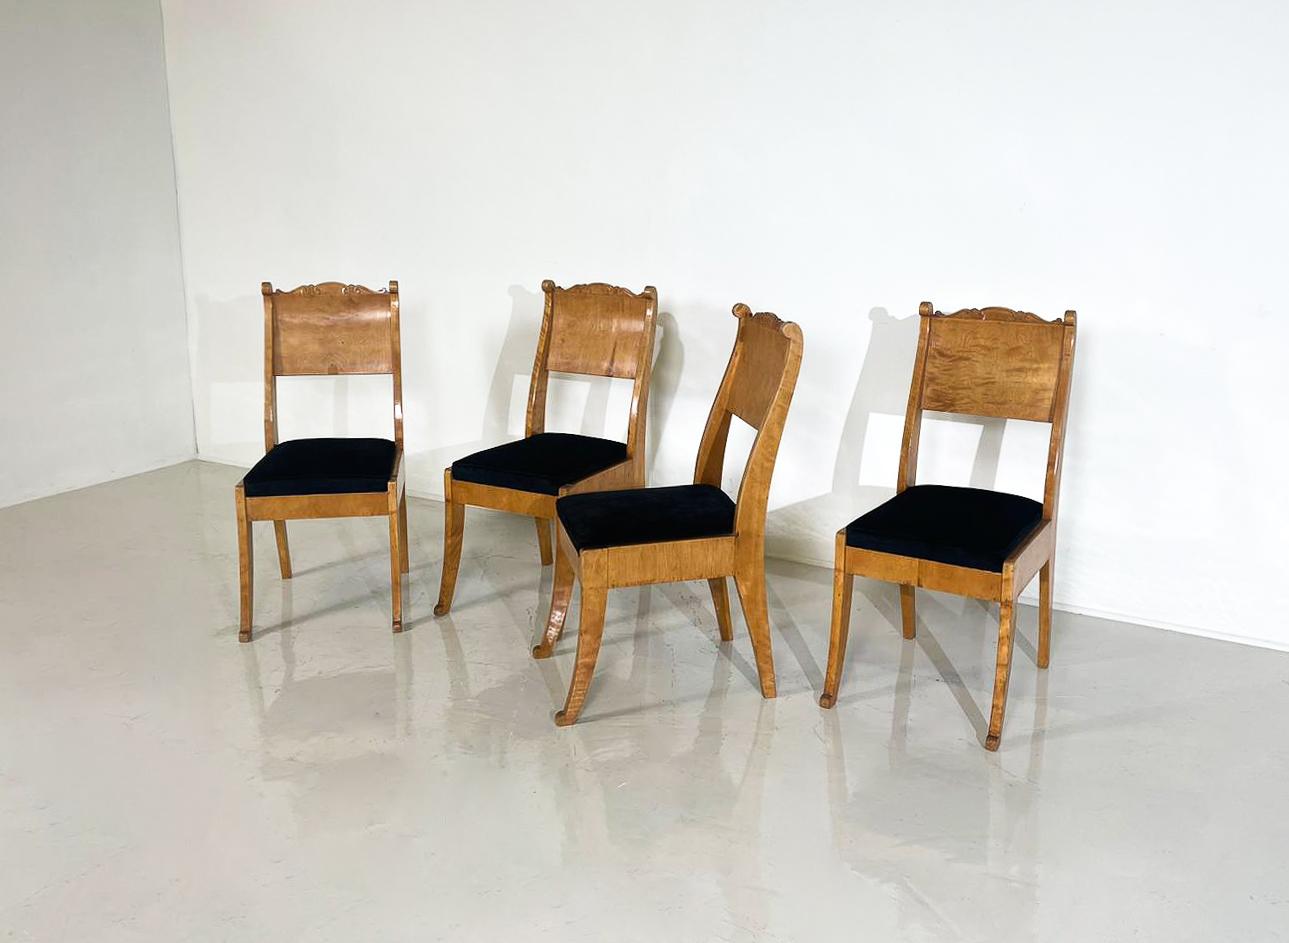 Wood Set of 4 Russian Chairs, Birch Veneer, Early 19th Century For Sale